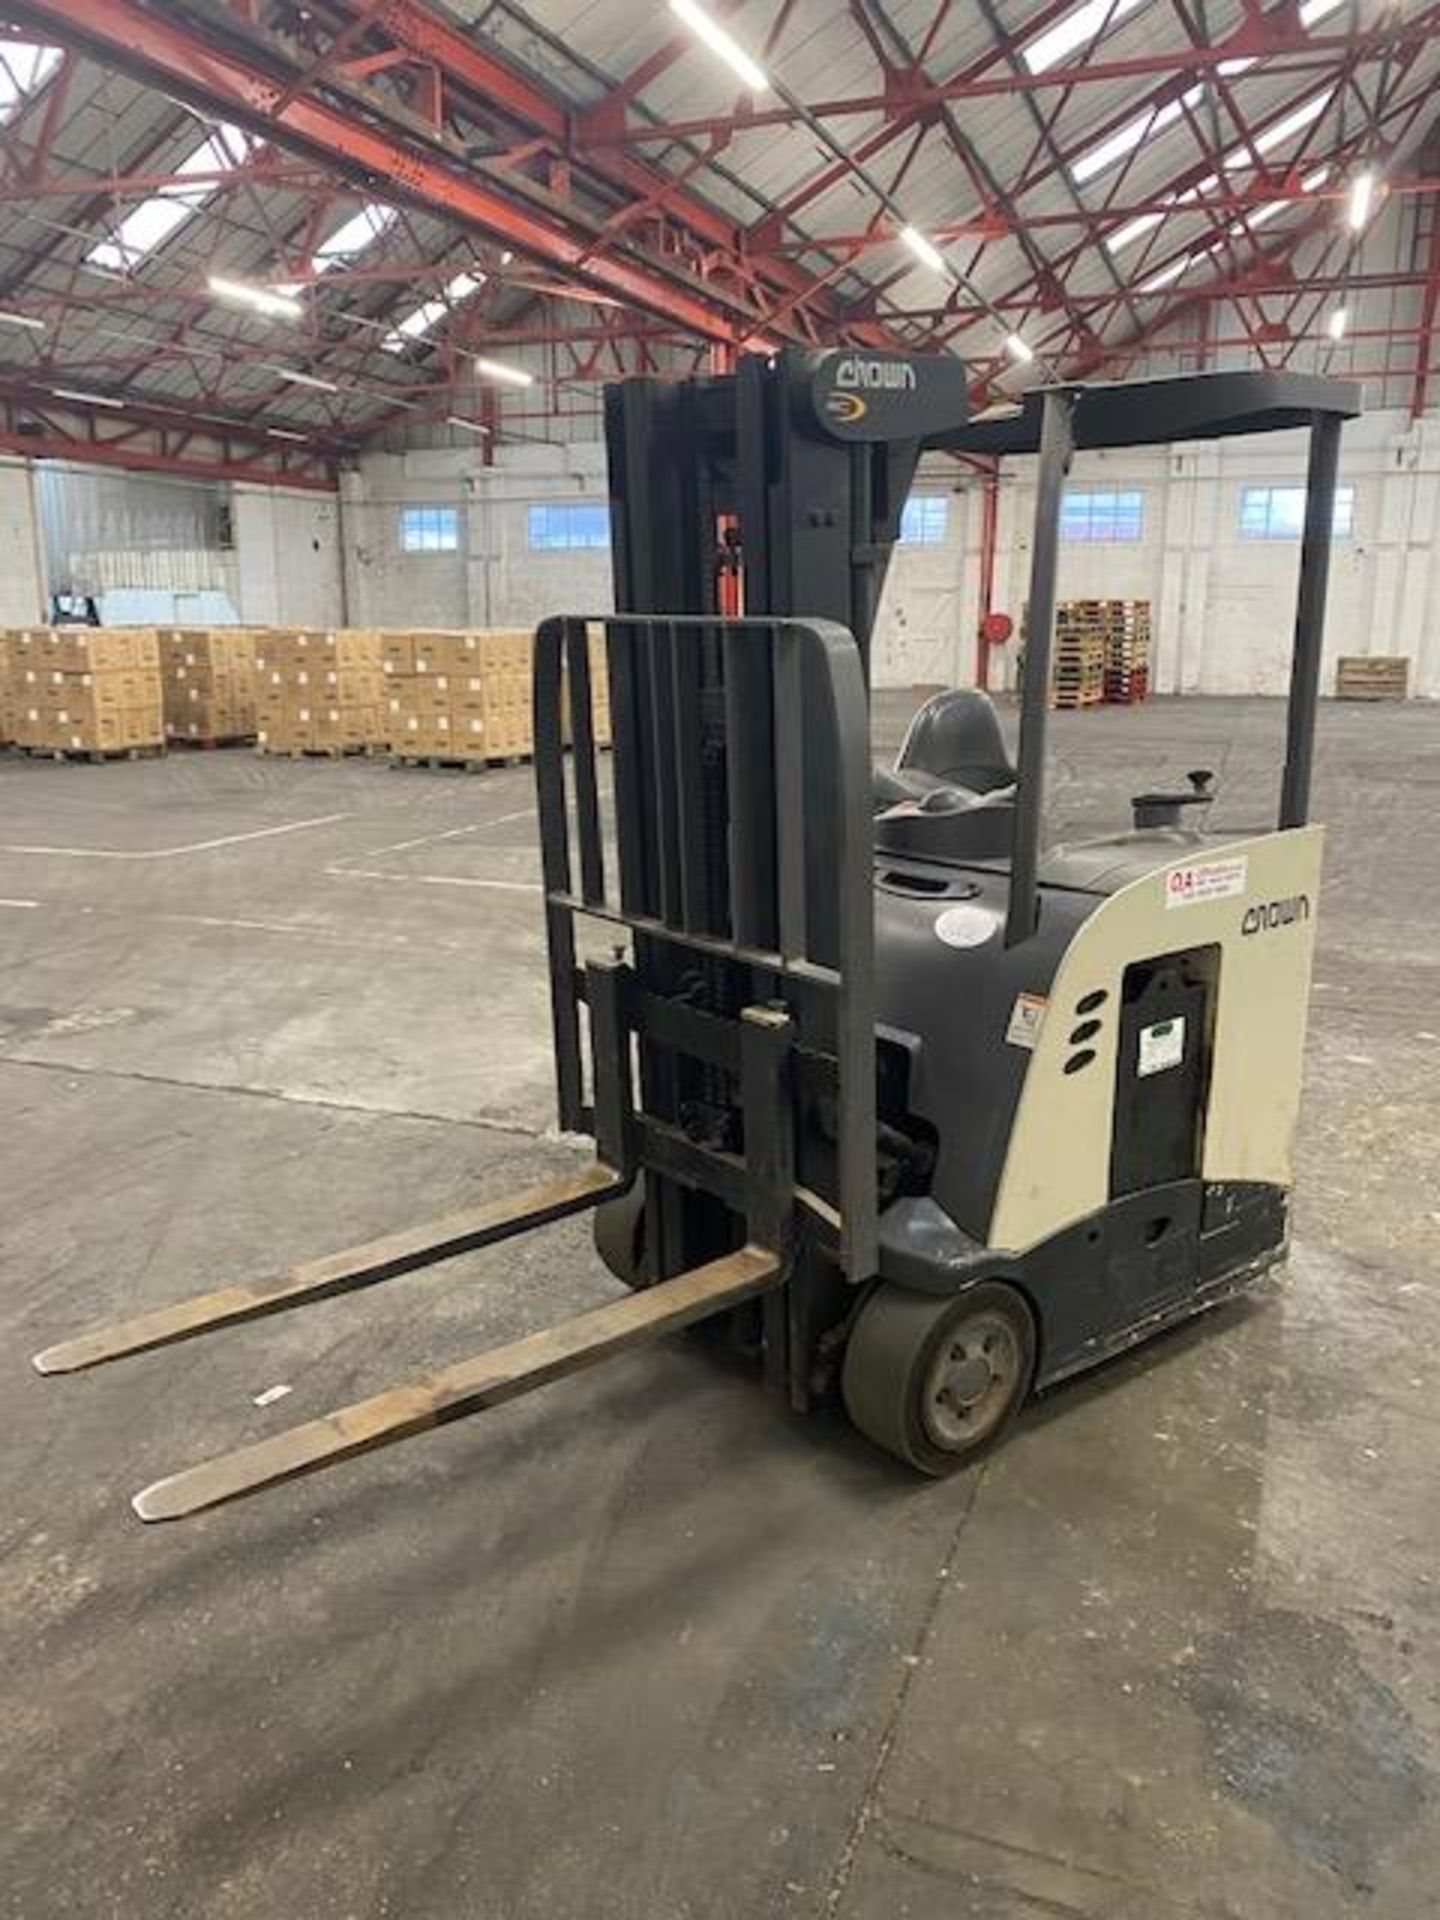 + VAT Grade A 2008 Crown Stand In 3 Wheel Forklift - Approx 1570 Hours - 1500Kg Capacity - Will